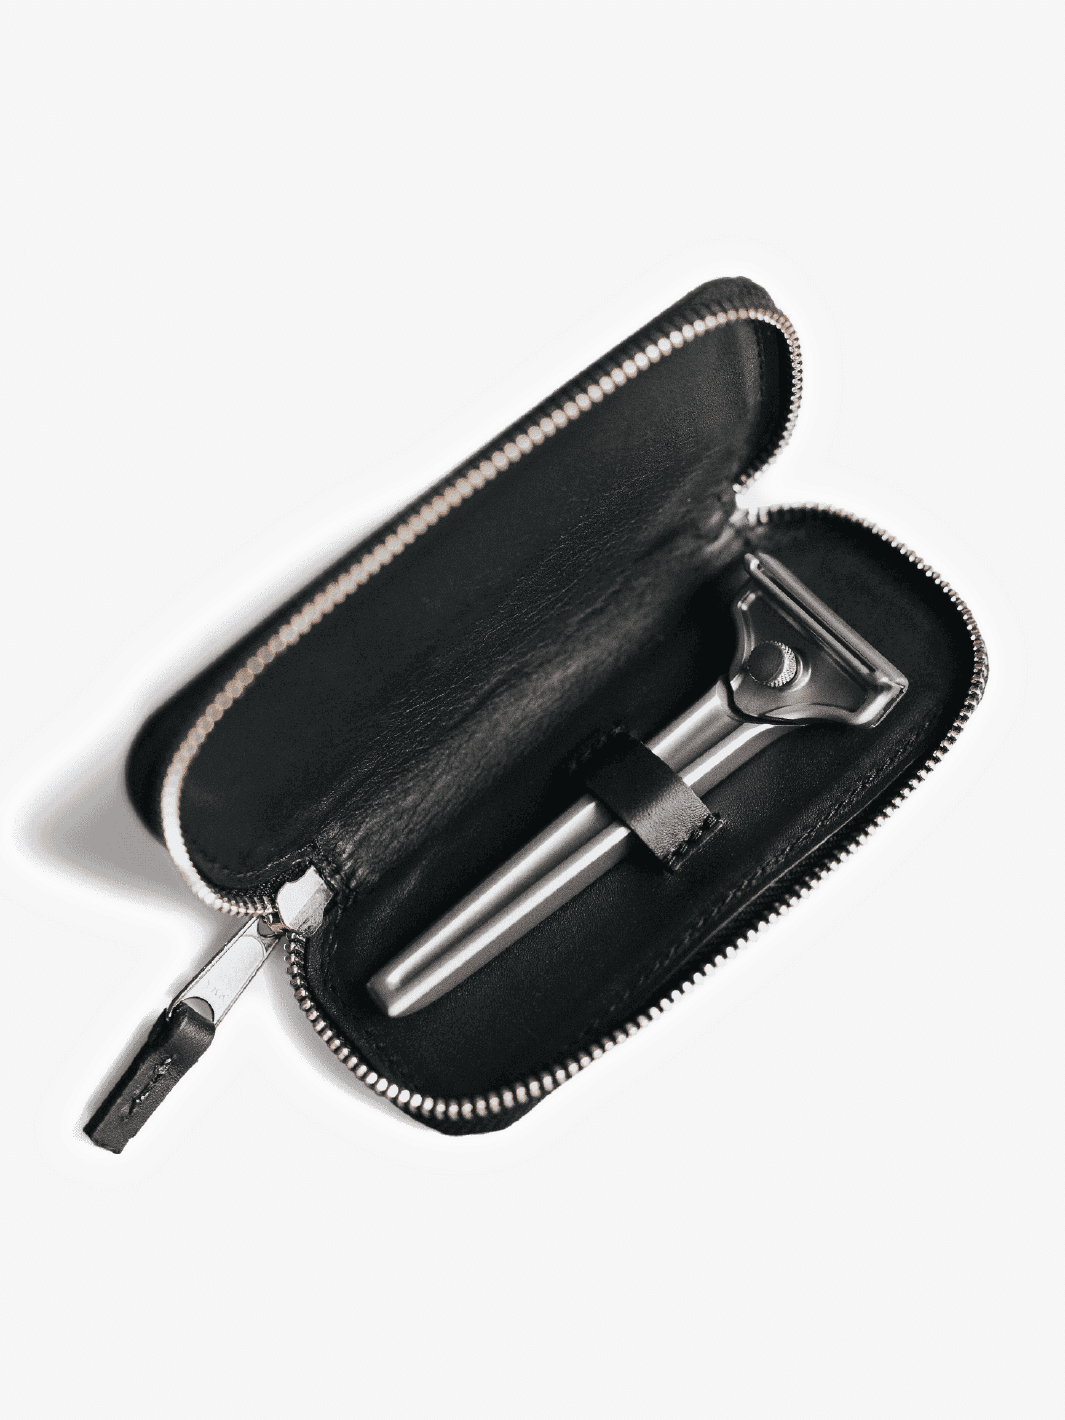 The Leather Travel Case